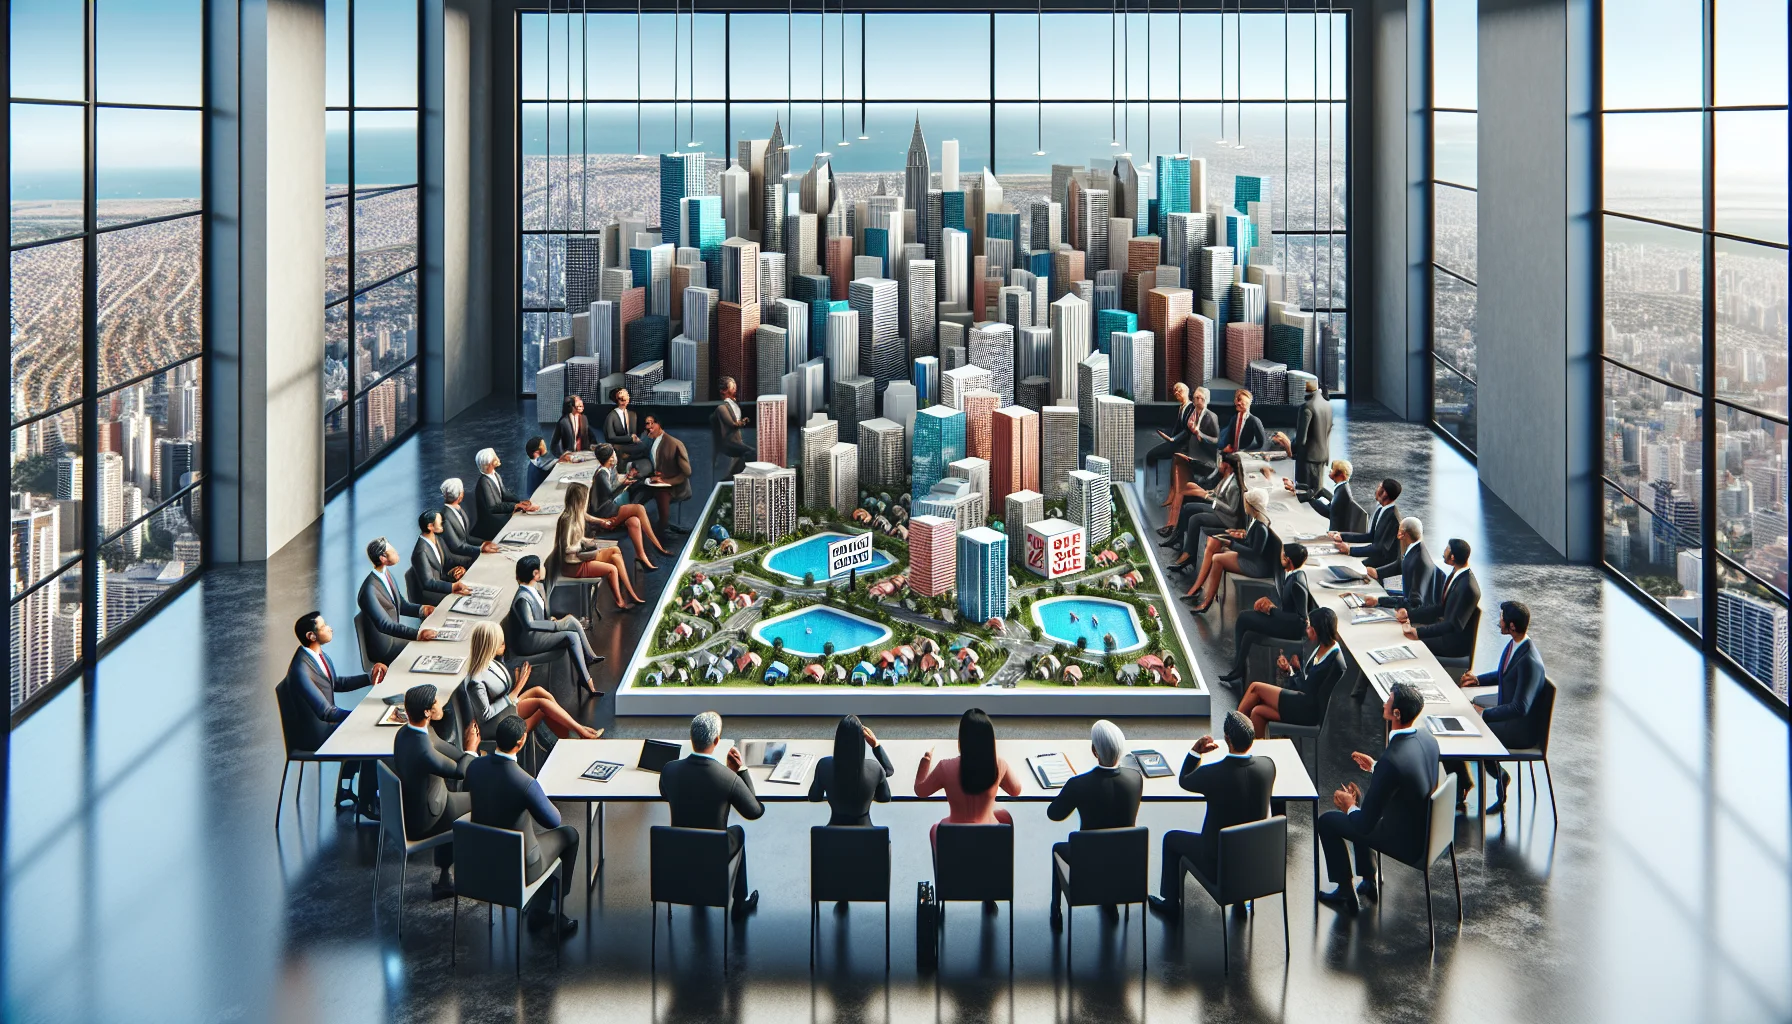 Create a realistic and amusing image of a real estate association meeting. The scene takes place in a sleek, modern conference room filled with a diverse group of professional individuals of various descents such as Caucasian, Hispanic, Black, Middle-Eastern, and South Asian. Both men and women are present, each engaged in energetic conversations. In the center of the room, an oversized three-dimensional map details the hottest properties around the city, complete with tiny for-sale signs and miniaturized recent developments. Occupying the background, huge panoramic windows reveal a bustling cityscape, visually representing their thriving real-estate market.